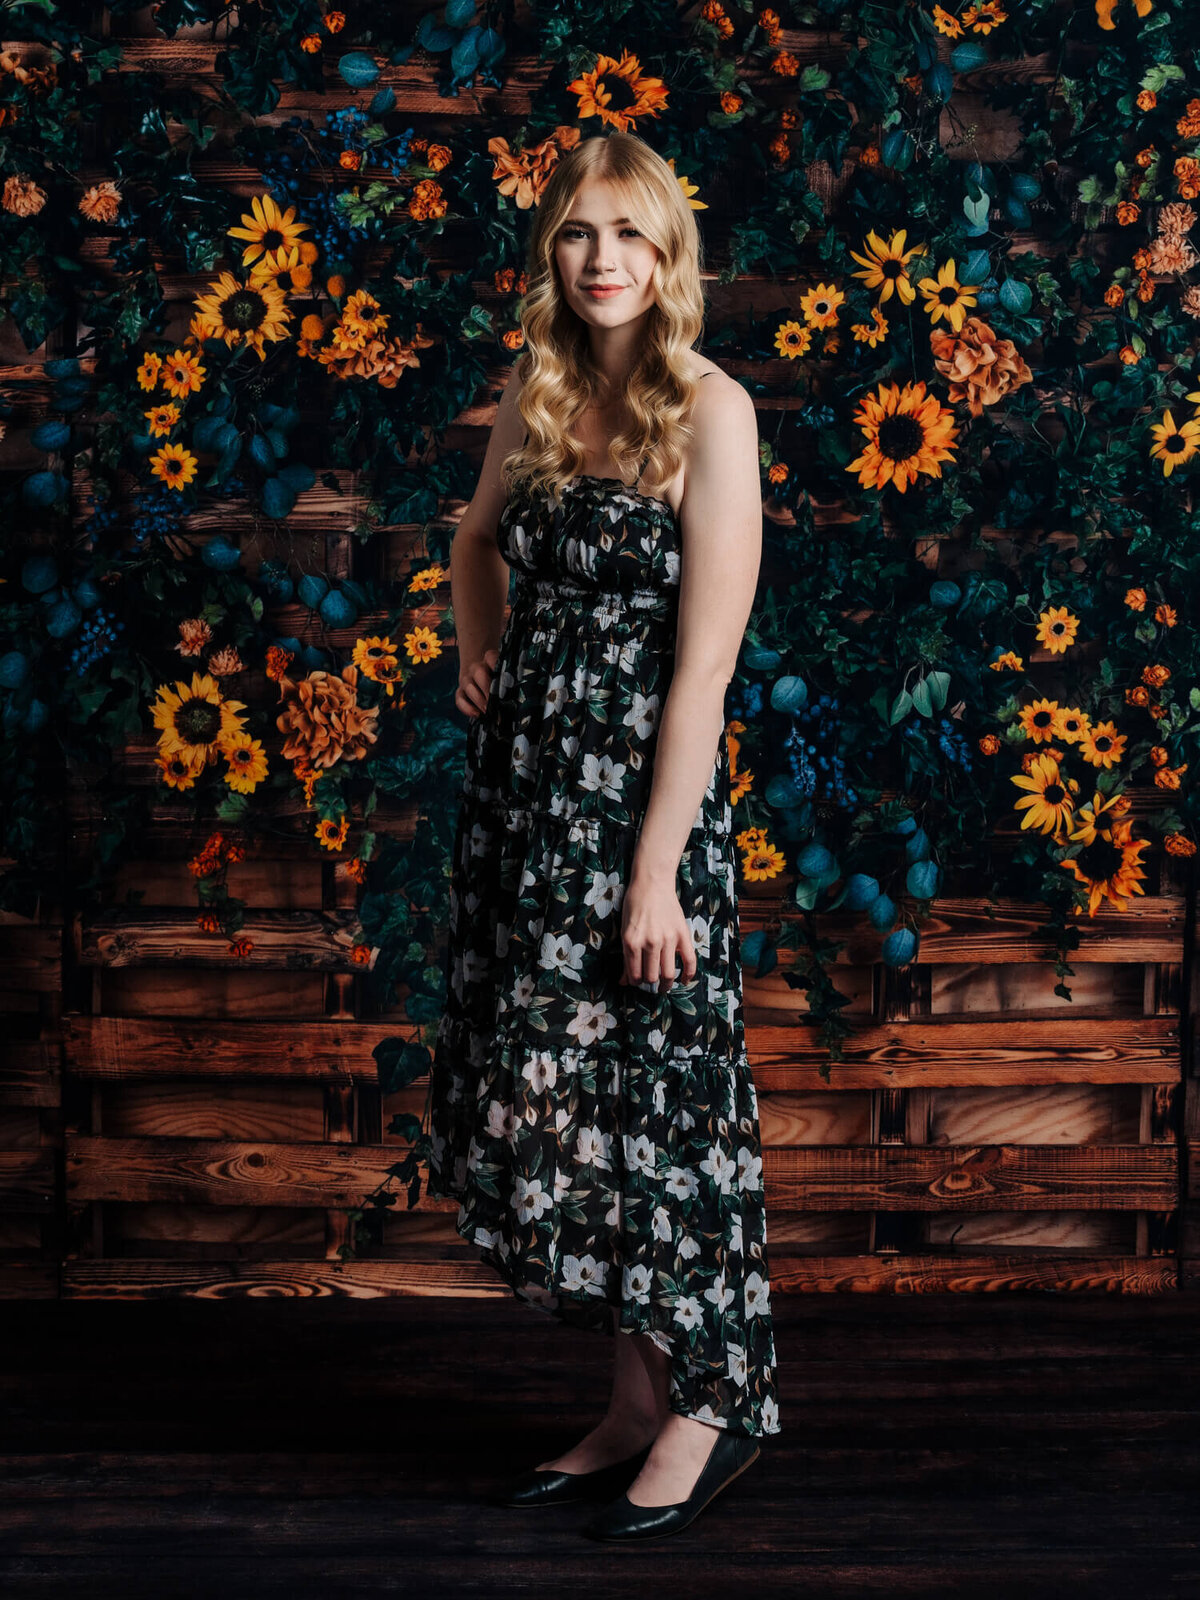 Girl poses in front of sunflowers in Prescott senior photography session